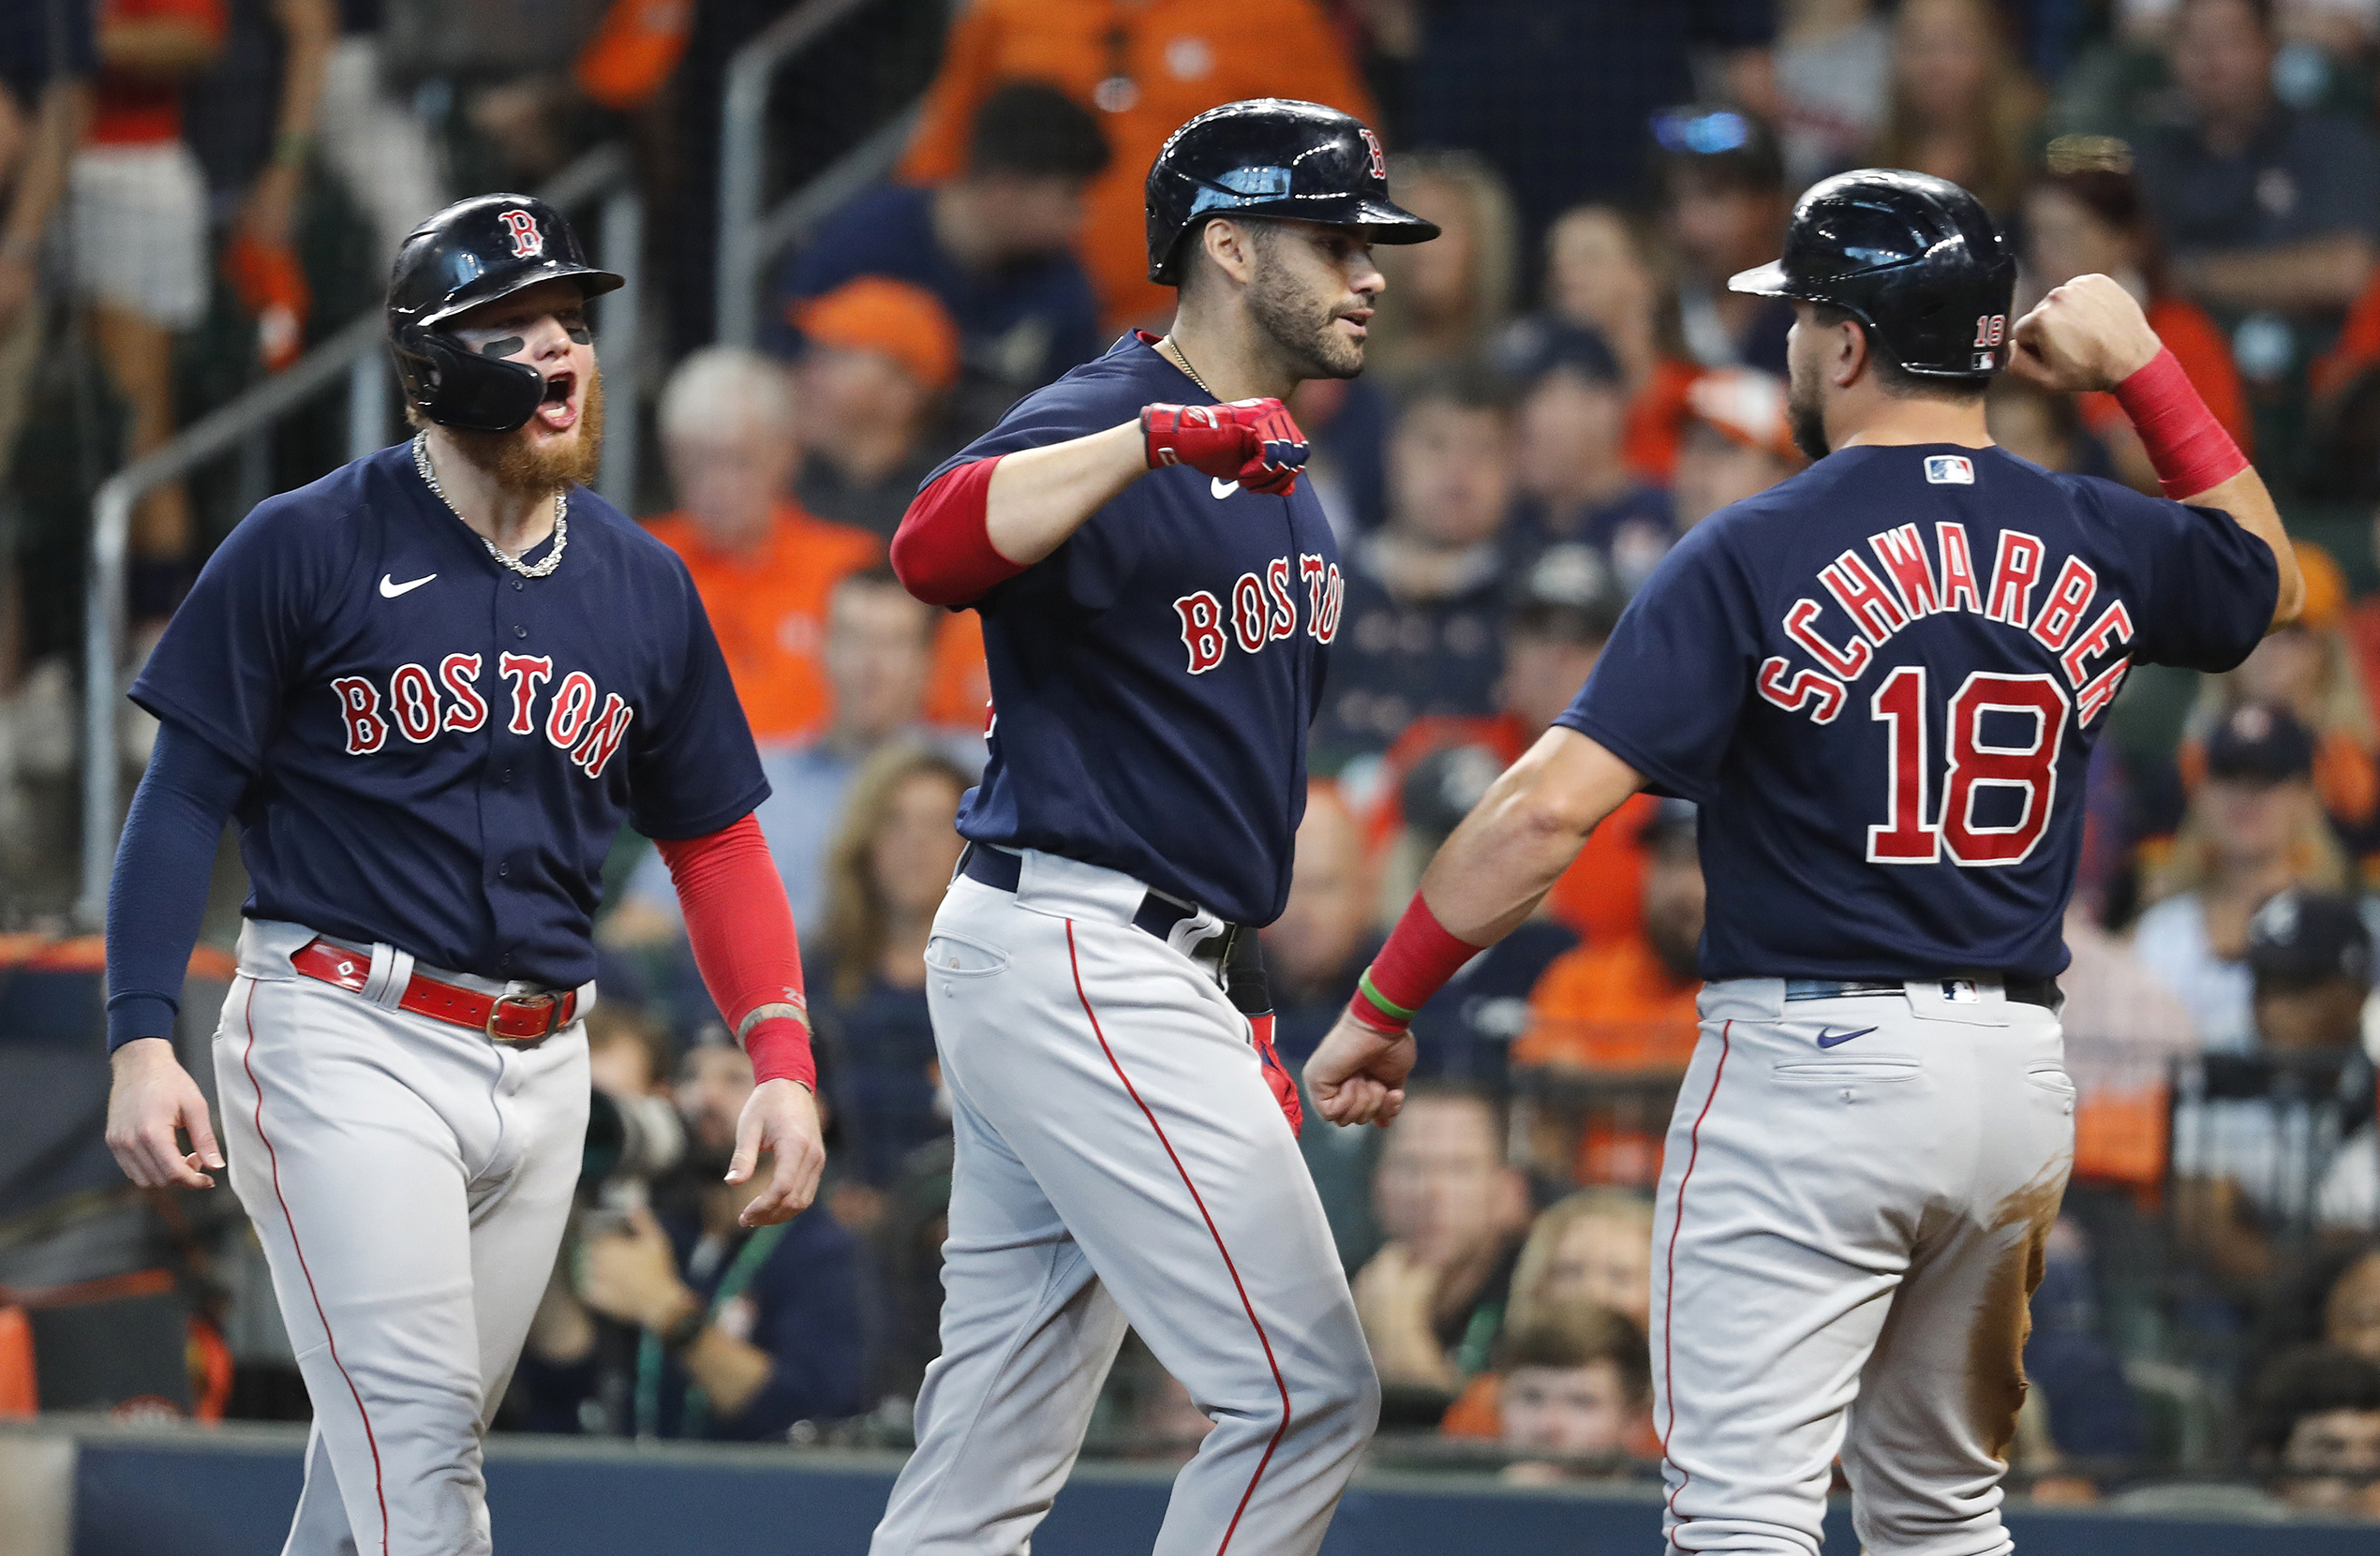 We Know We Have To Score A Lot Of Runs Two Grand Slams Propel Red Sox To A Game 2 Victory And Now The Alcs Is Tied - The Boston Globe